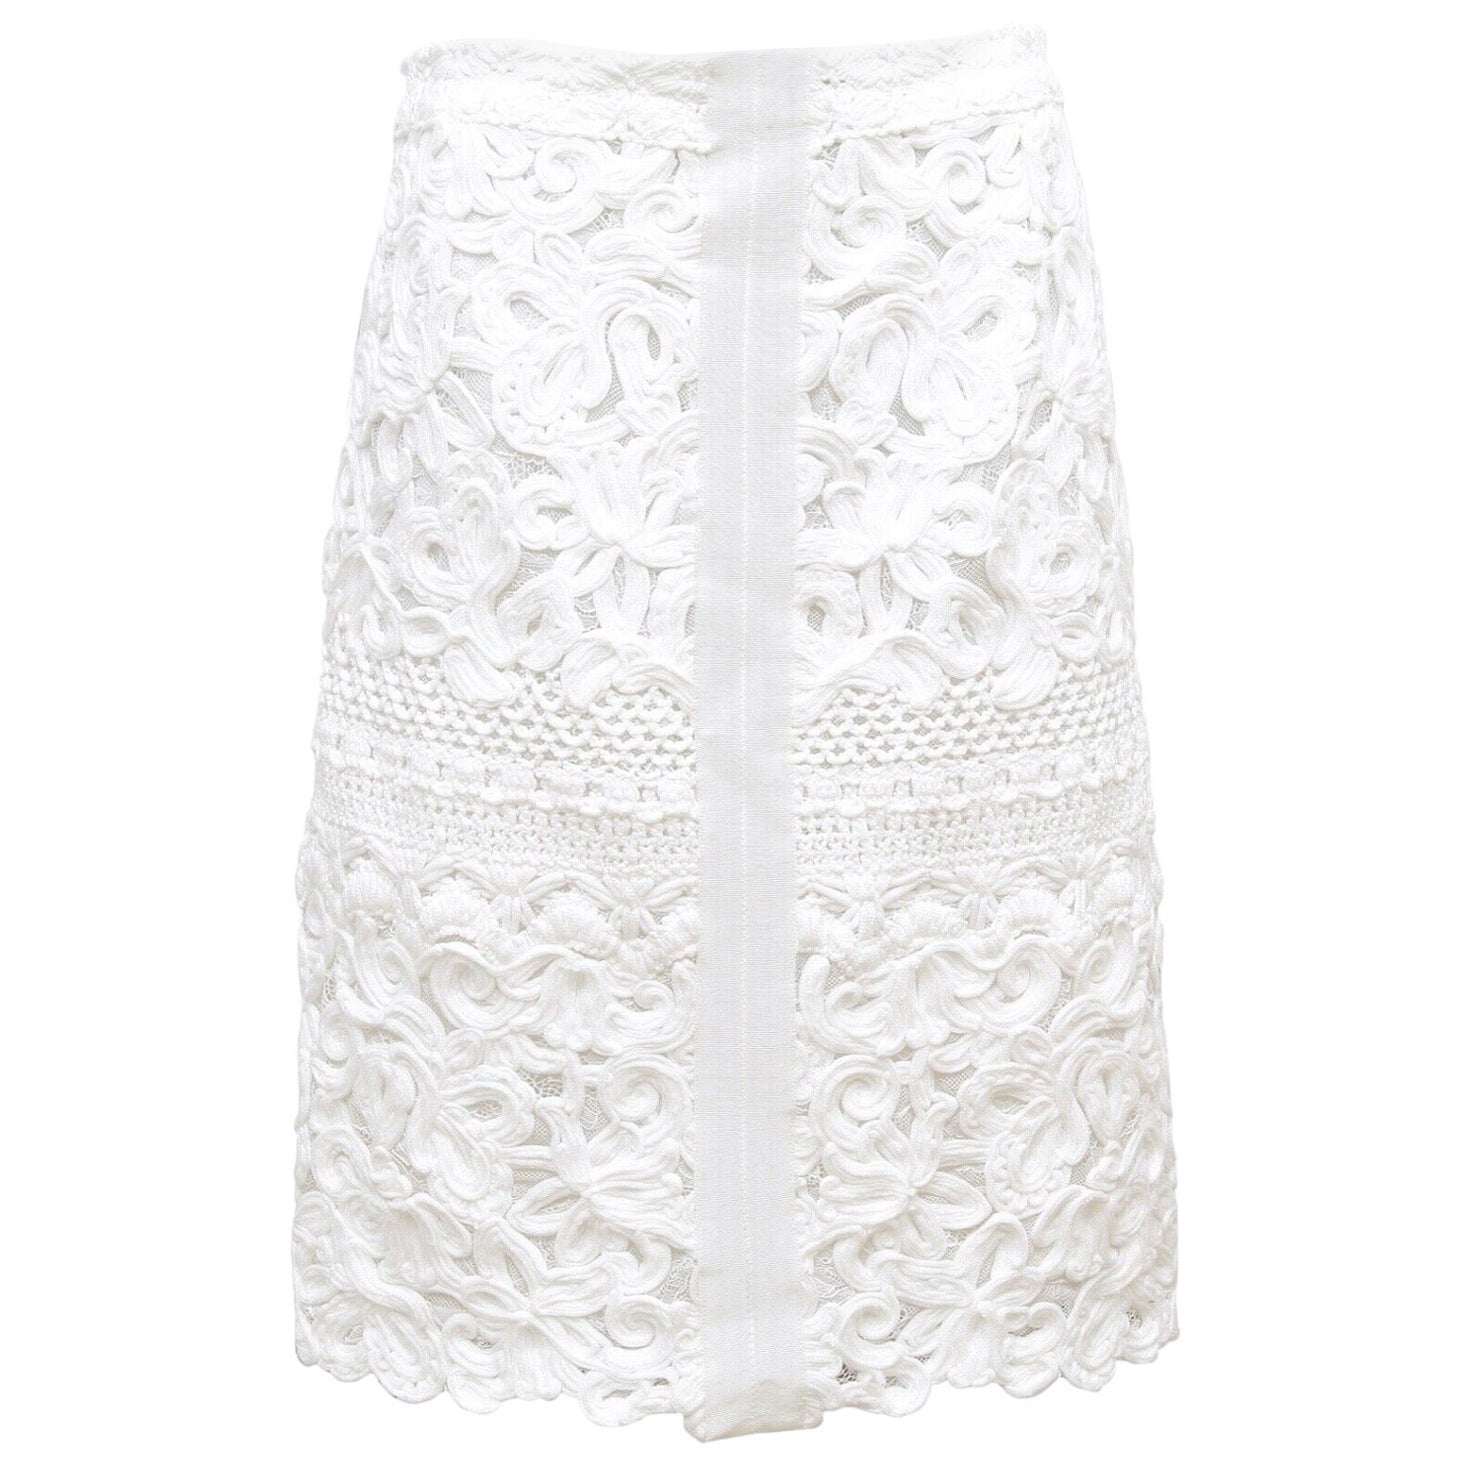 ERMANNO SCERVINO White Skirt Lace Pencil Lined Zipper Sz 40 NWT $1655 For Sale